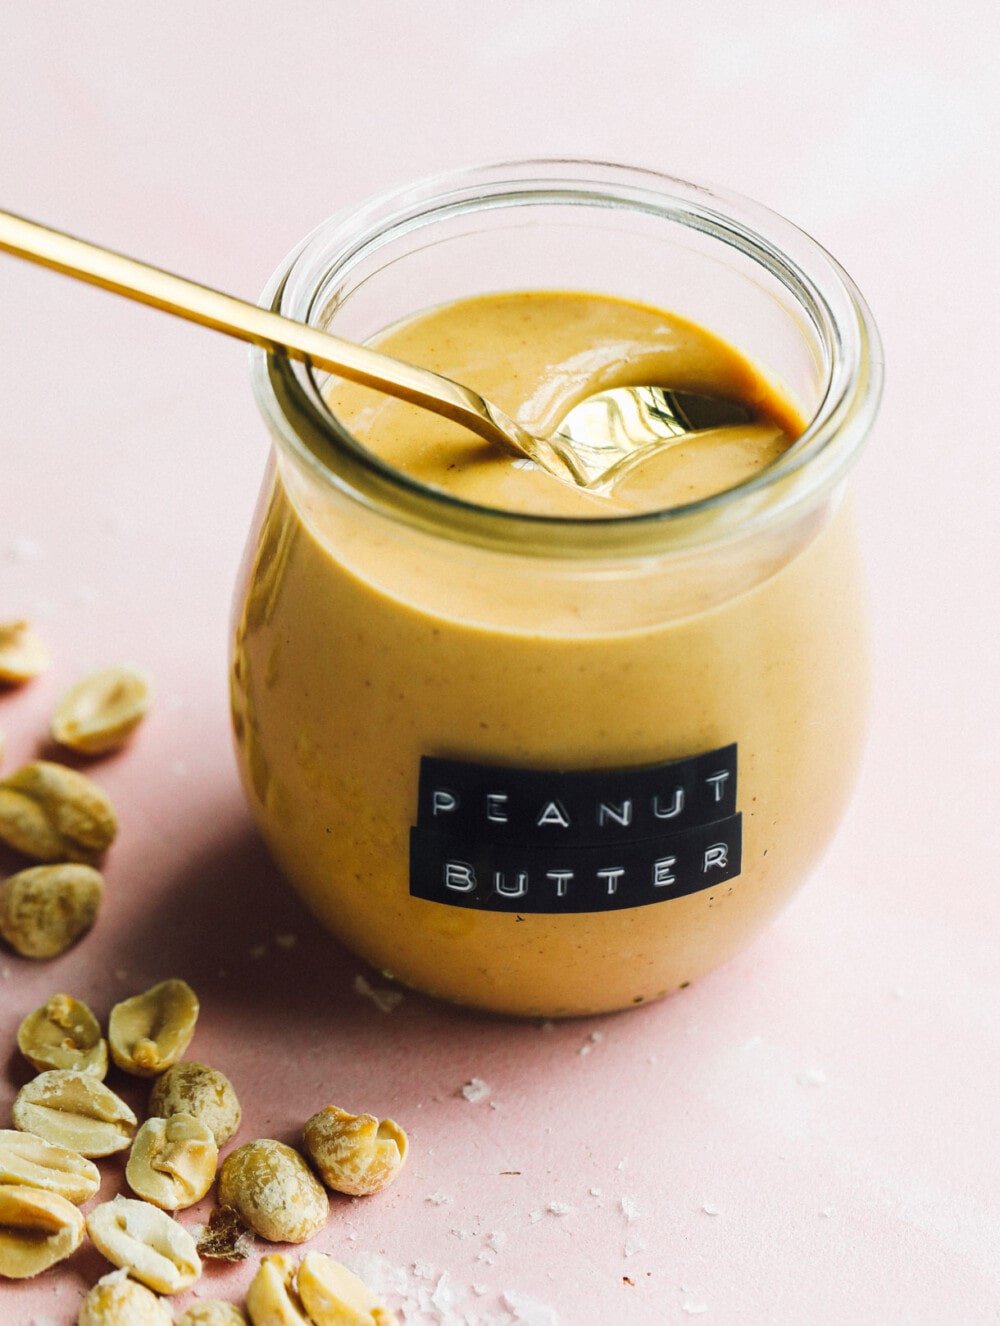 homemade peanut butter in glass jar with label